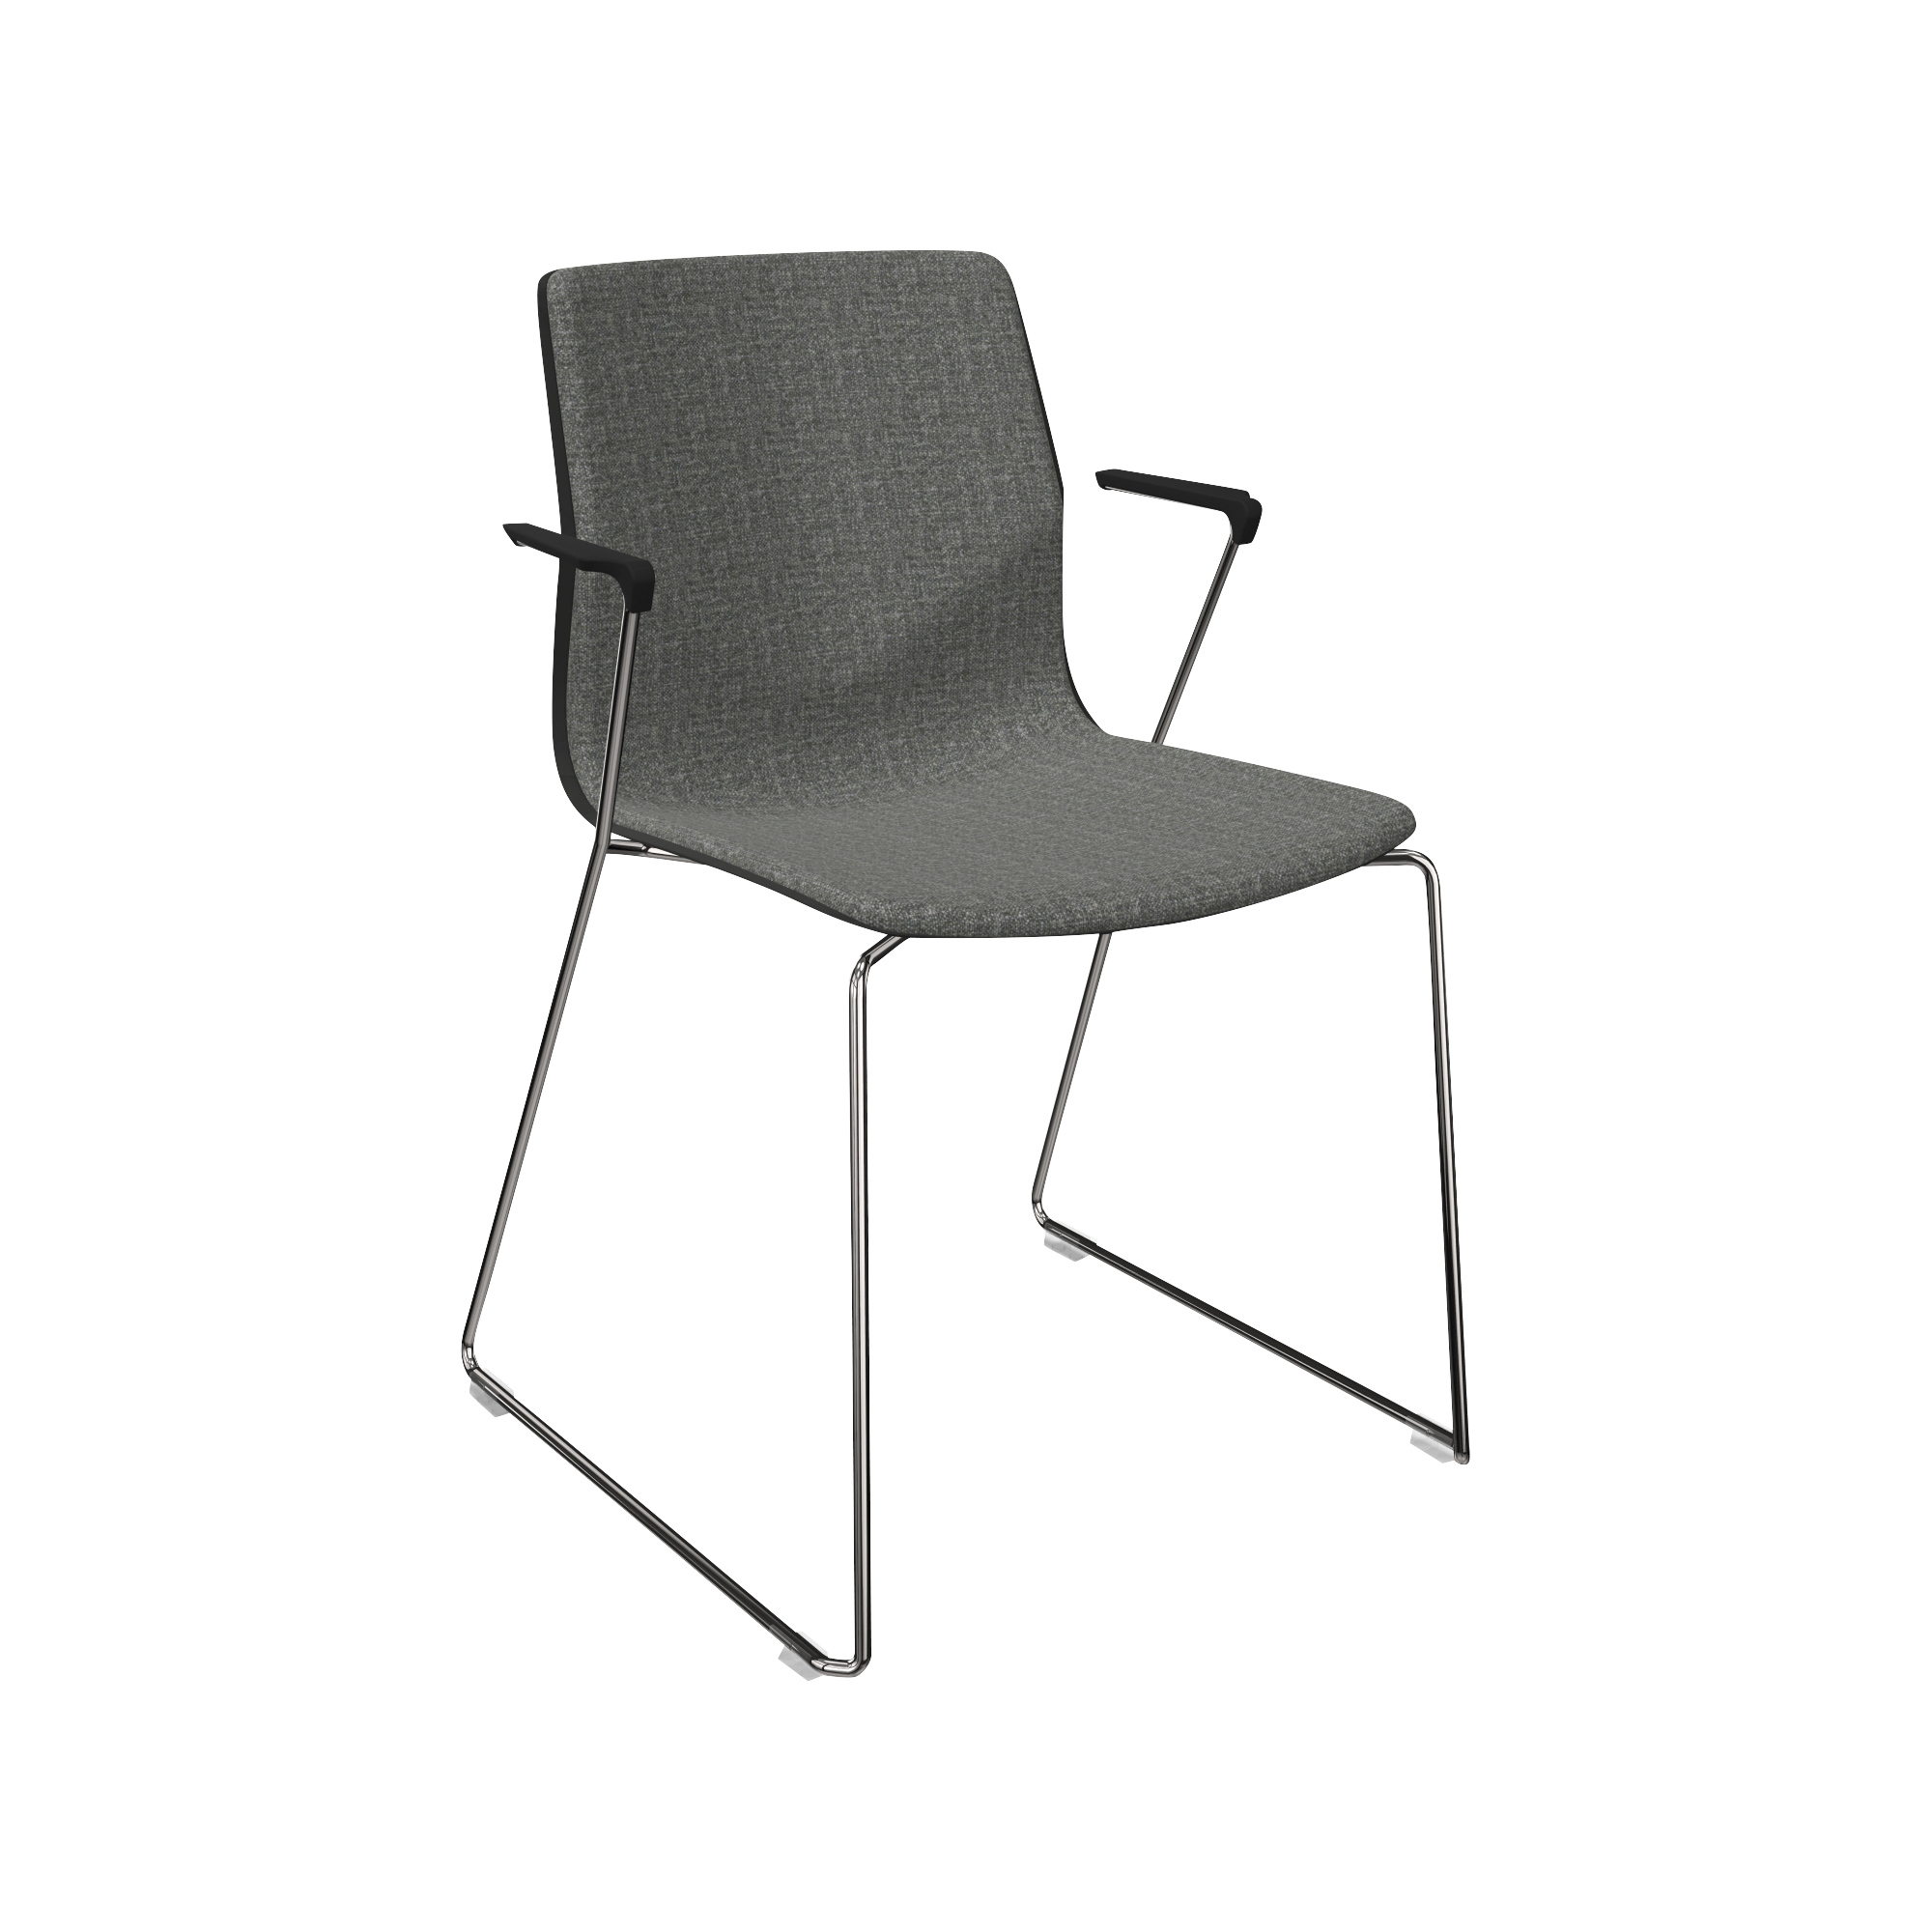 A grey chair with a metal frame